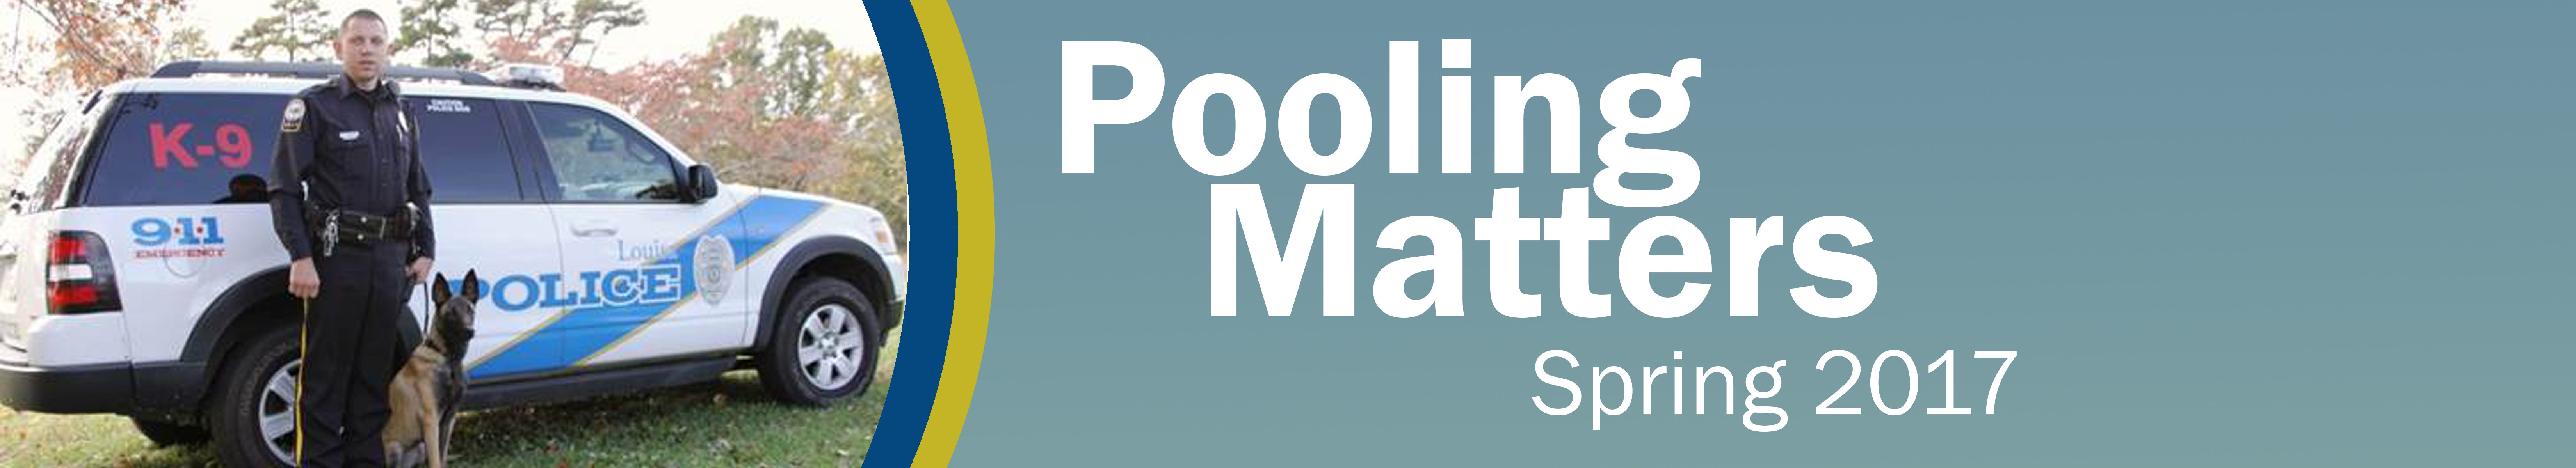 Pooling Matters